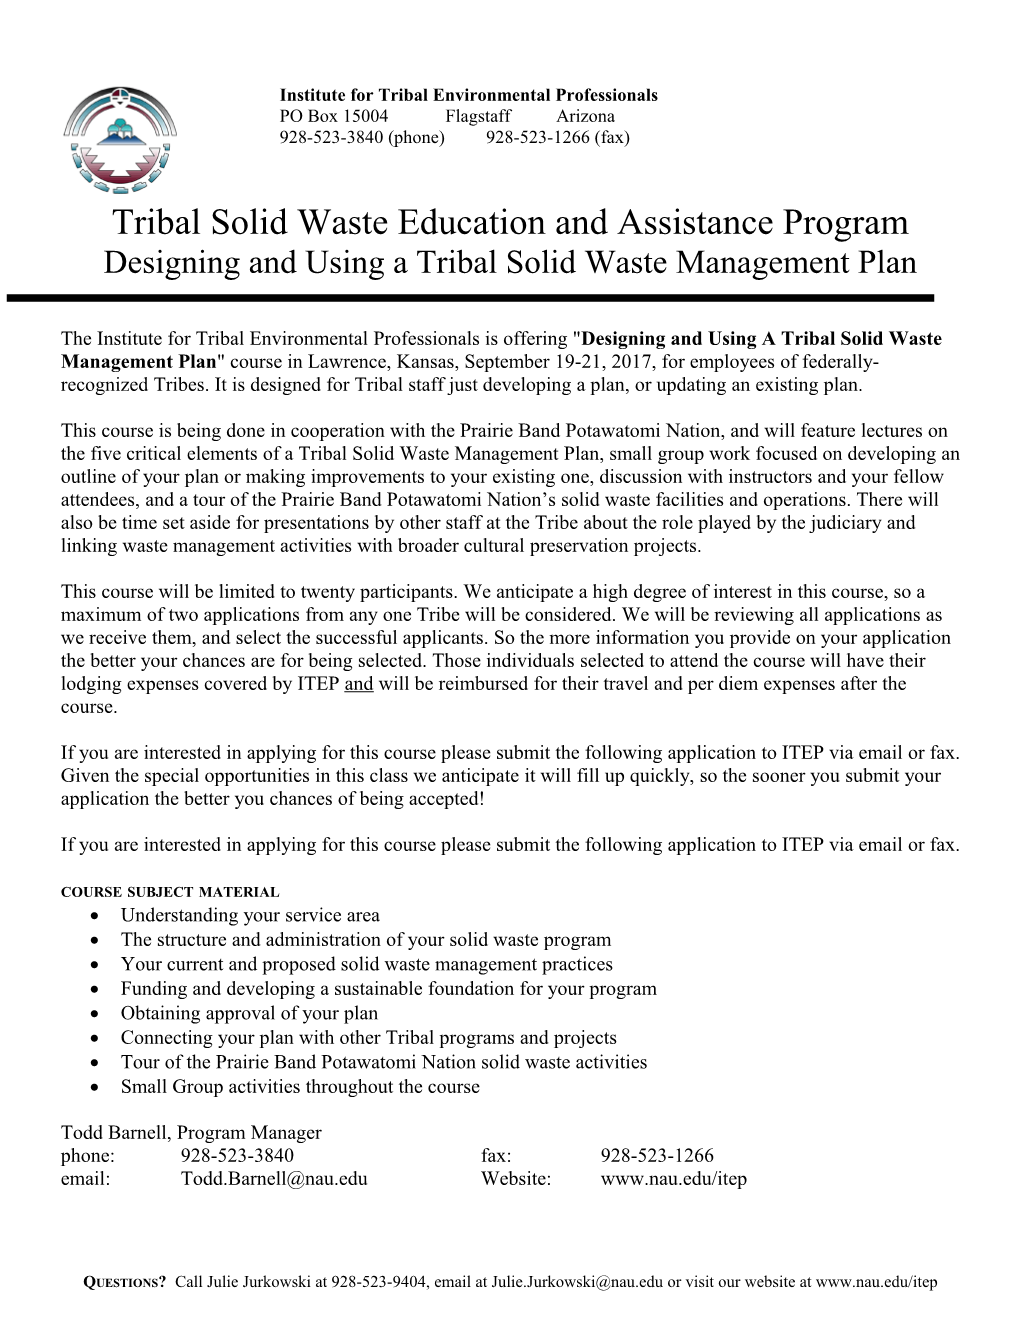 Tribal Solid Waste Education and Assistance Program